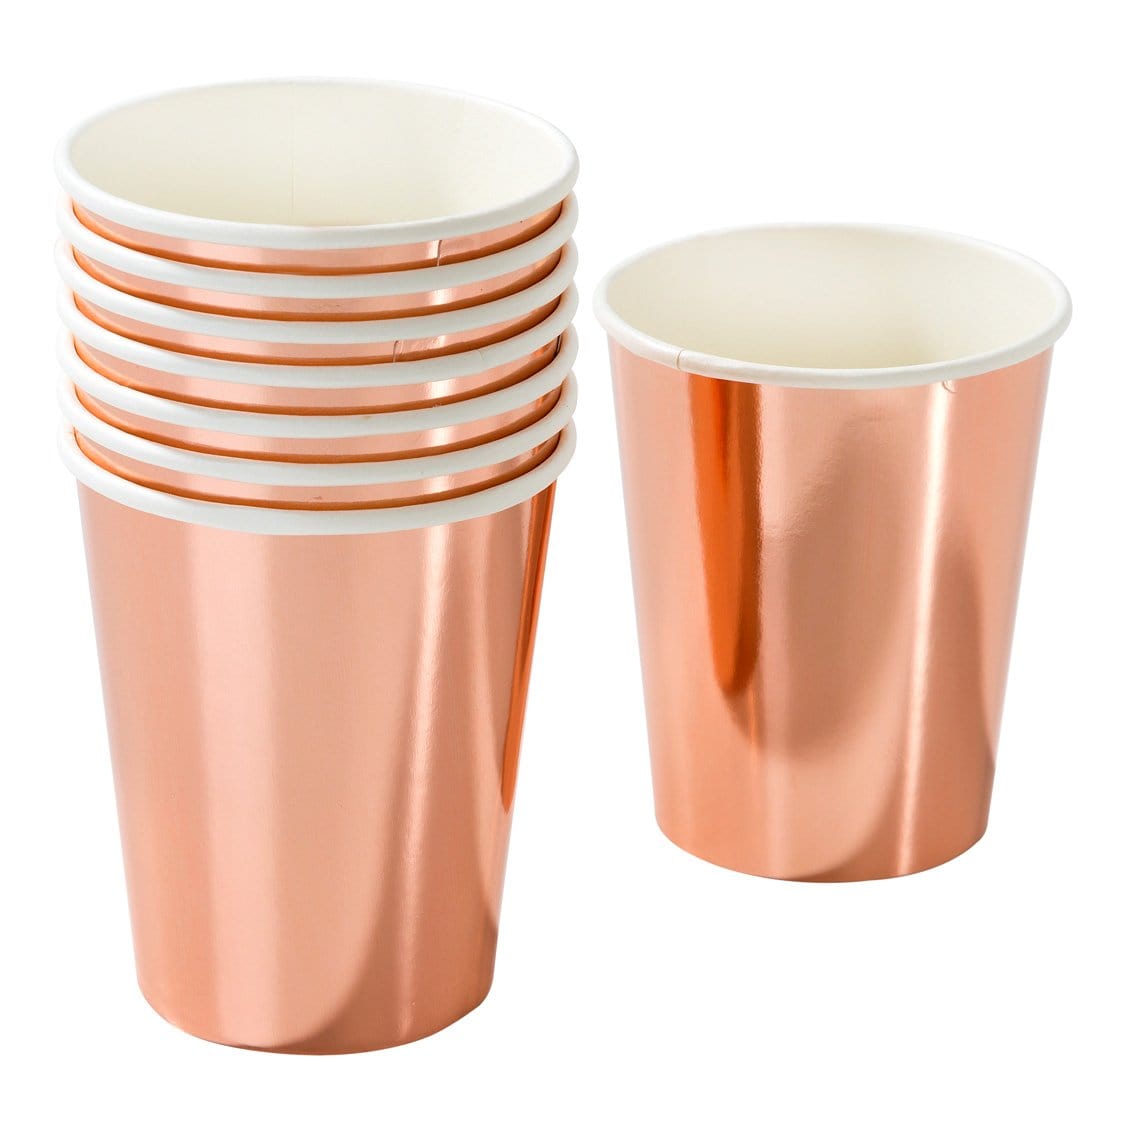 Party Porcelain Rose Gold Cup